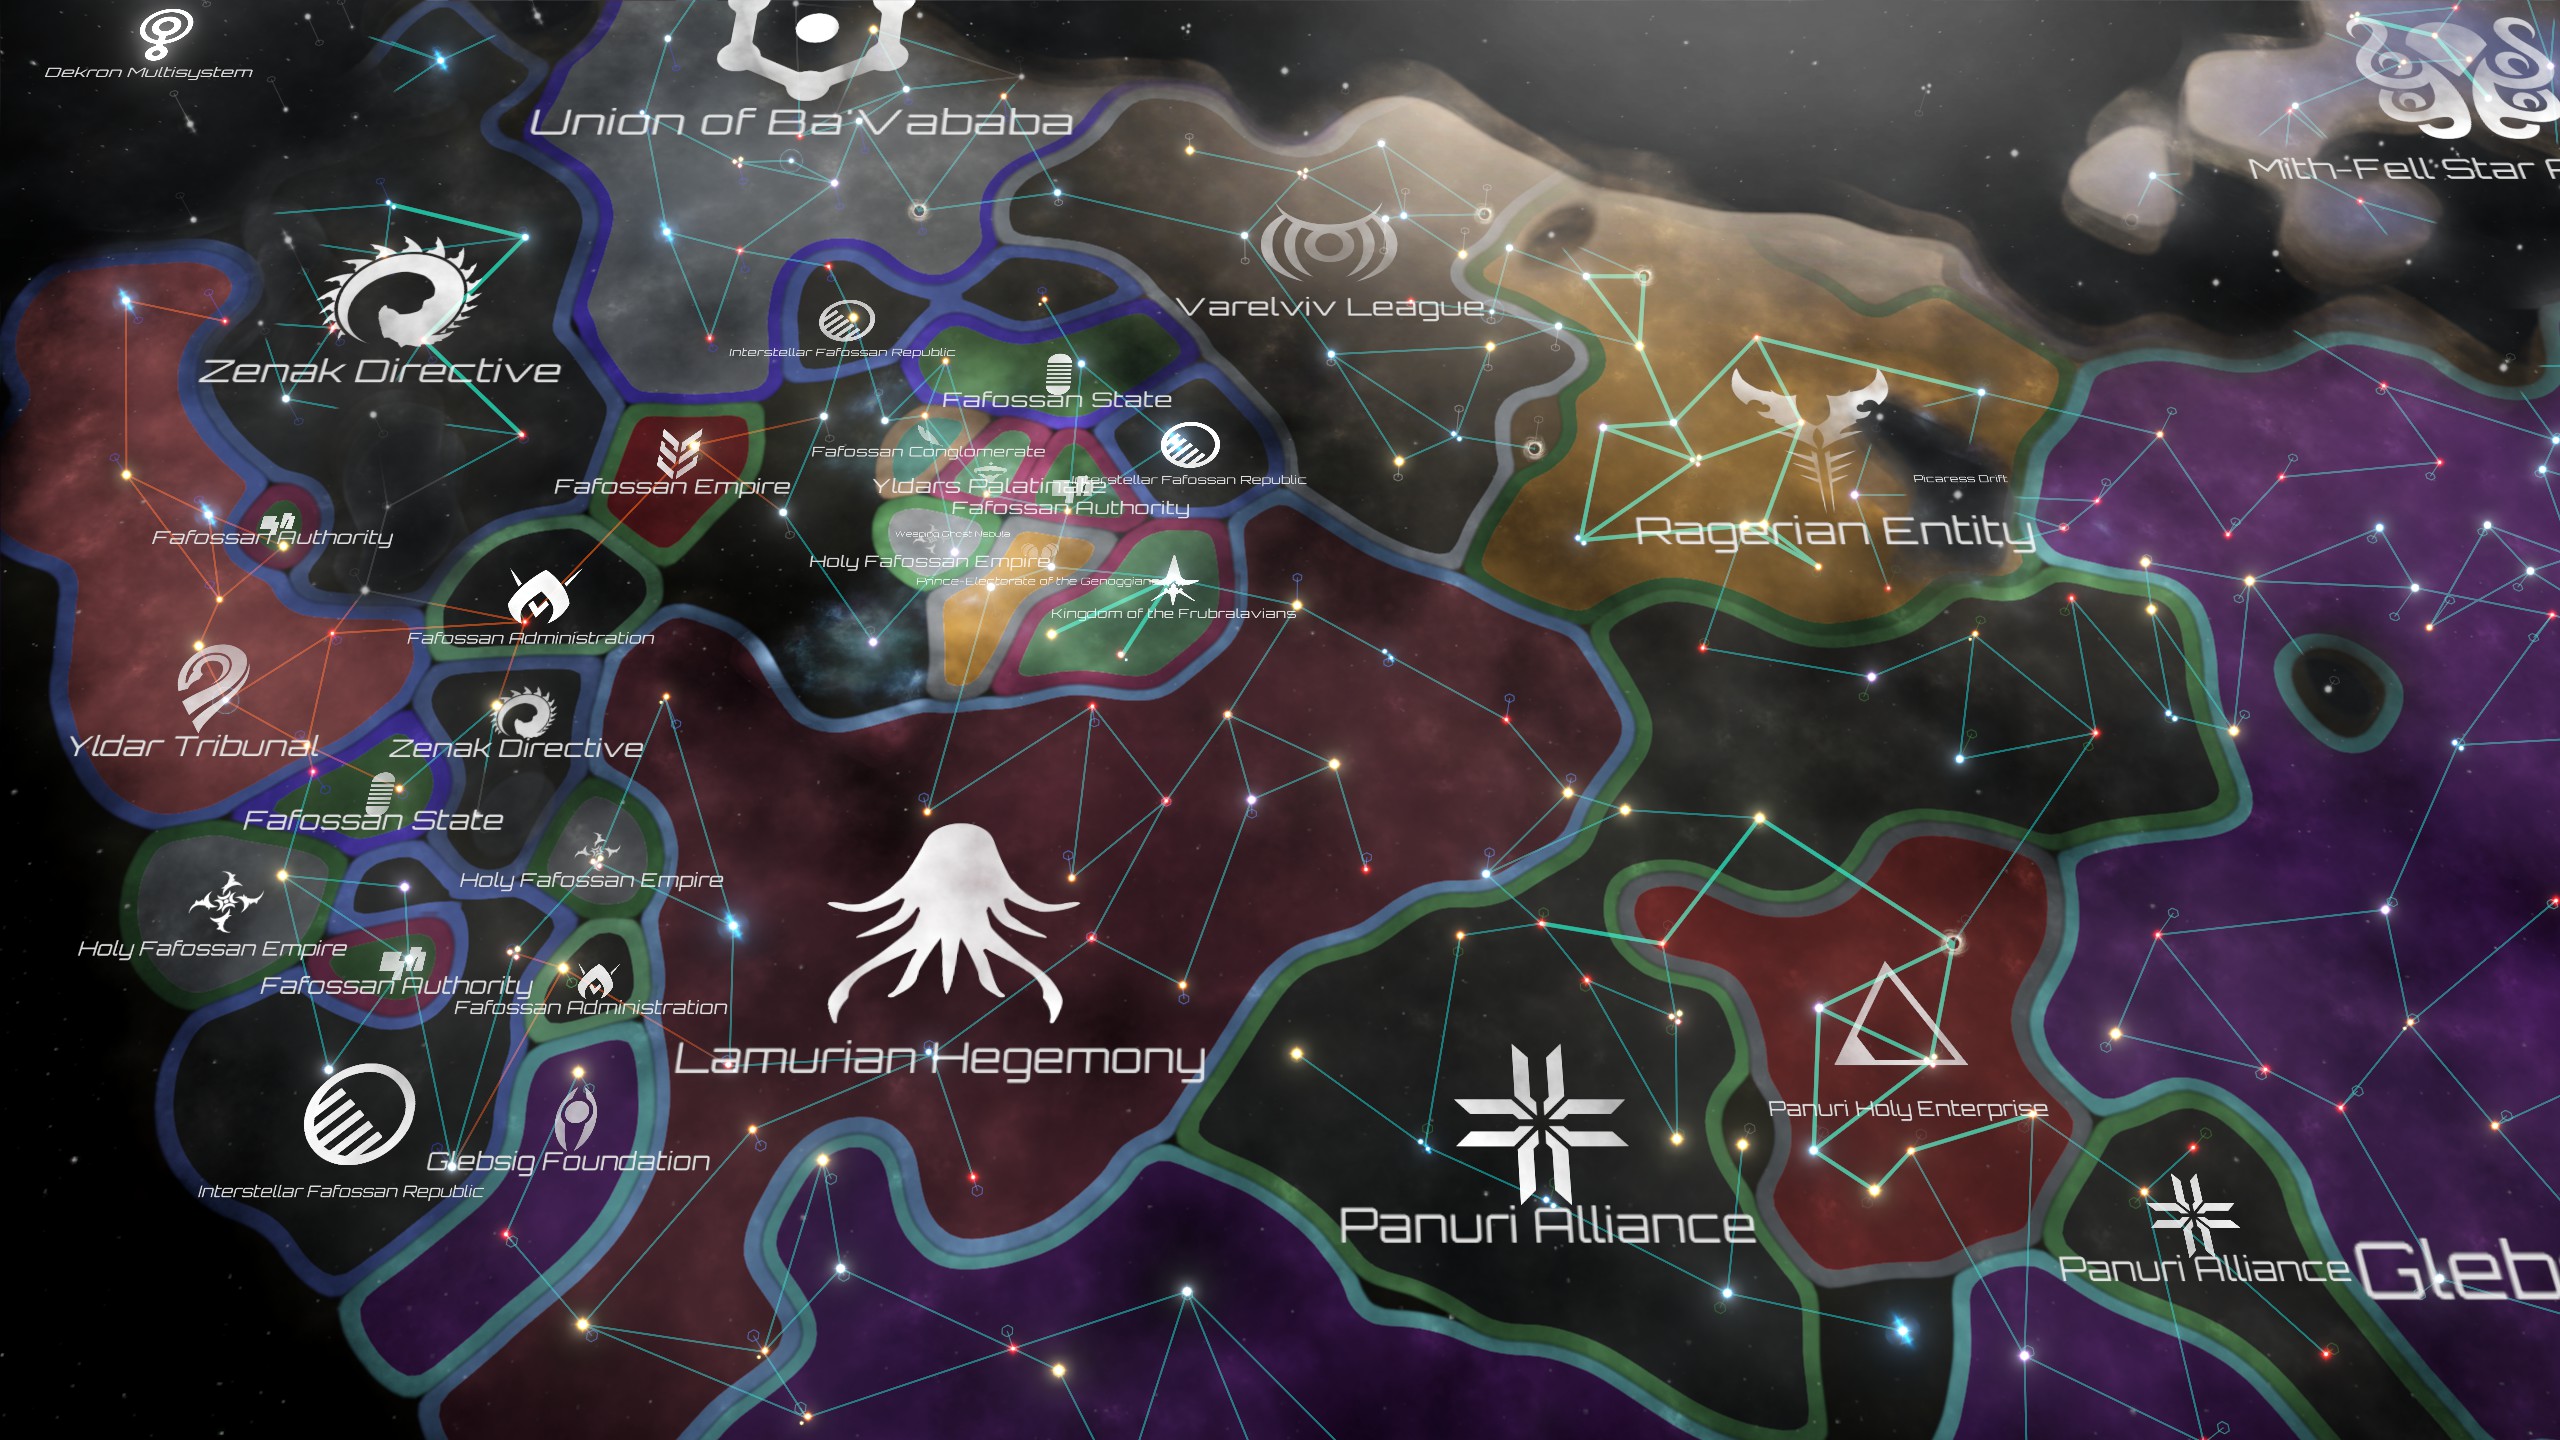 Stellaris Overlord fractured empire map